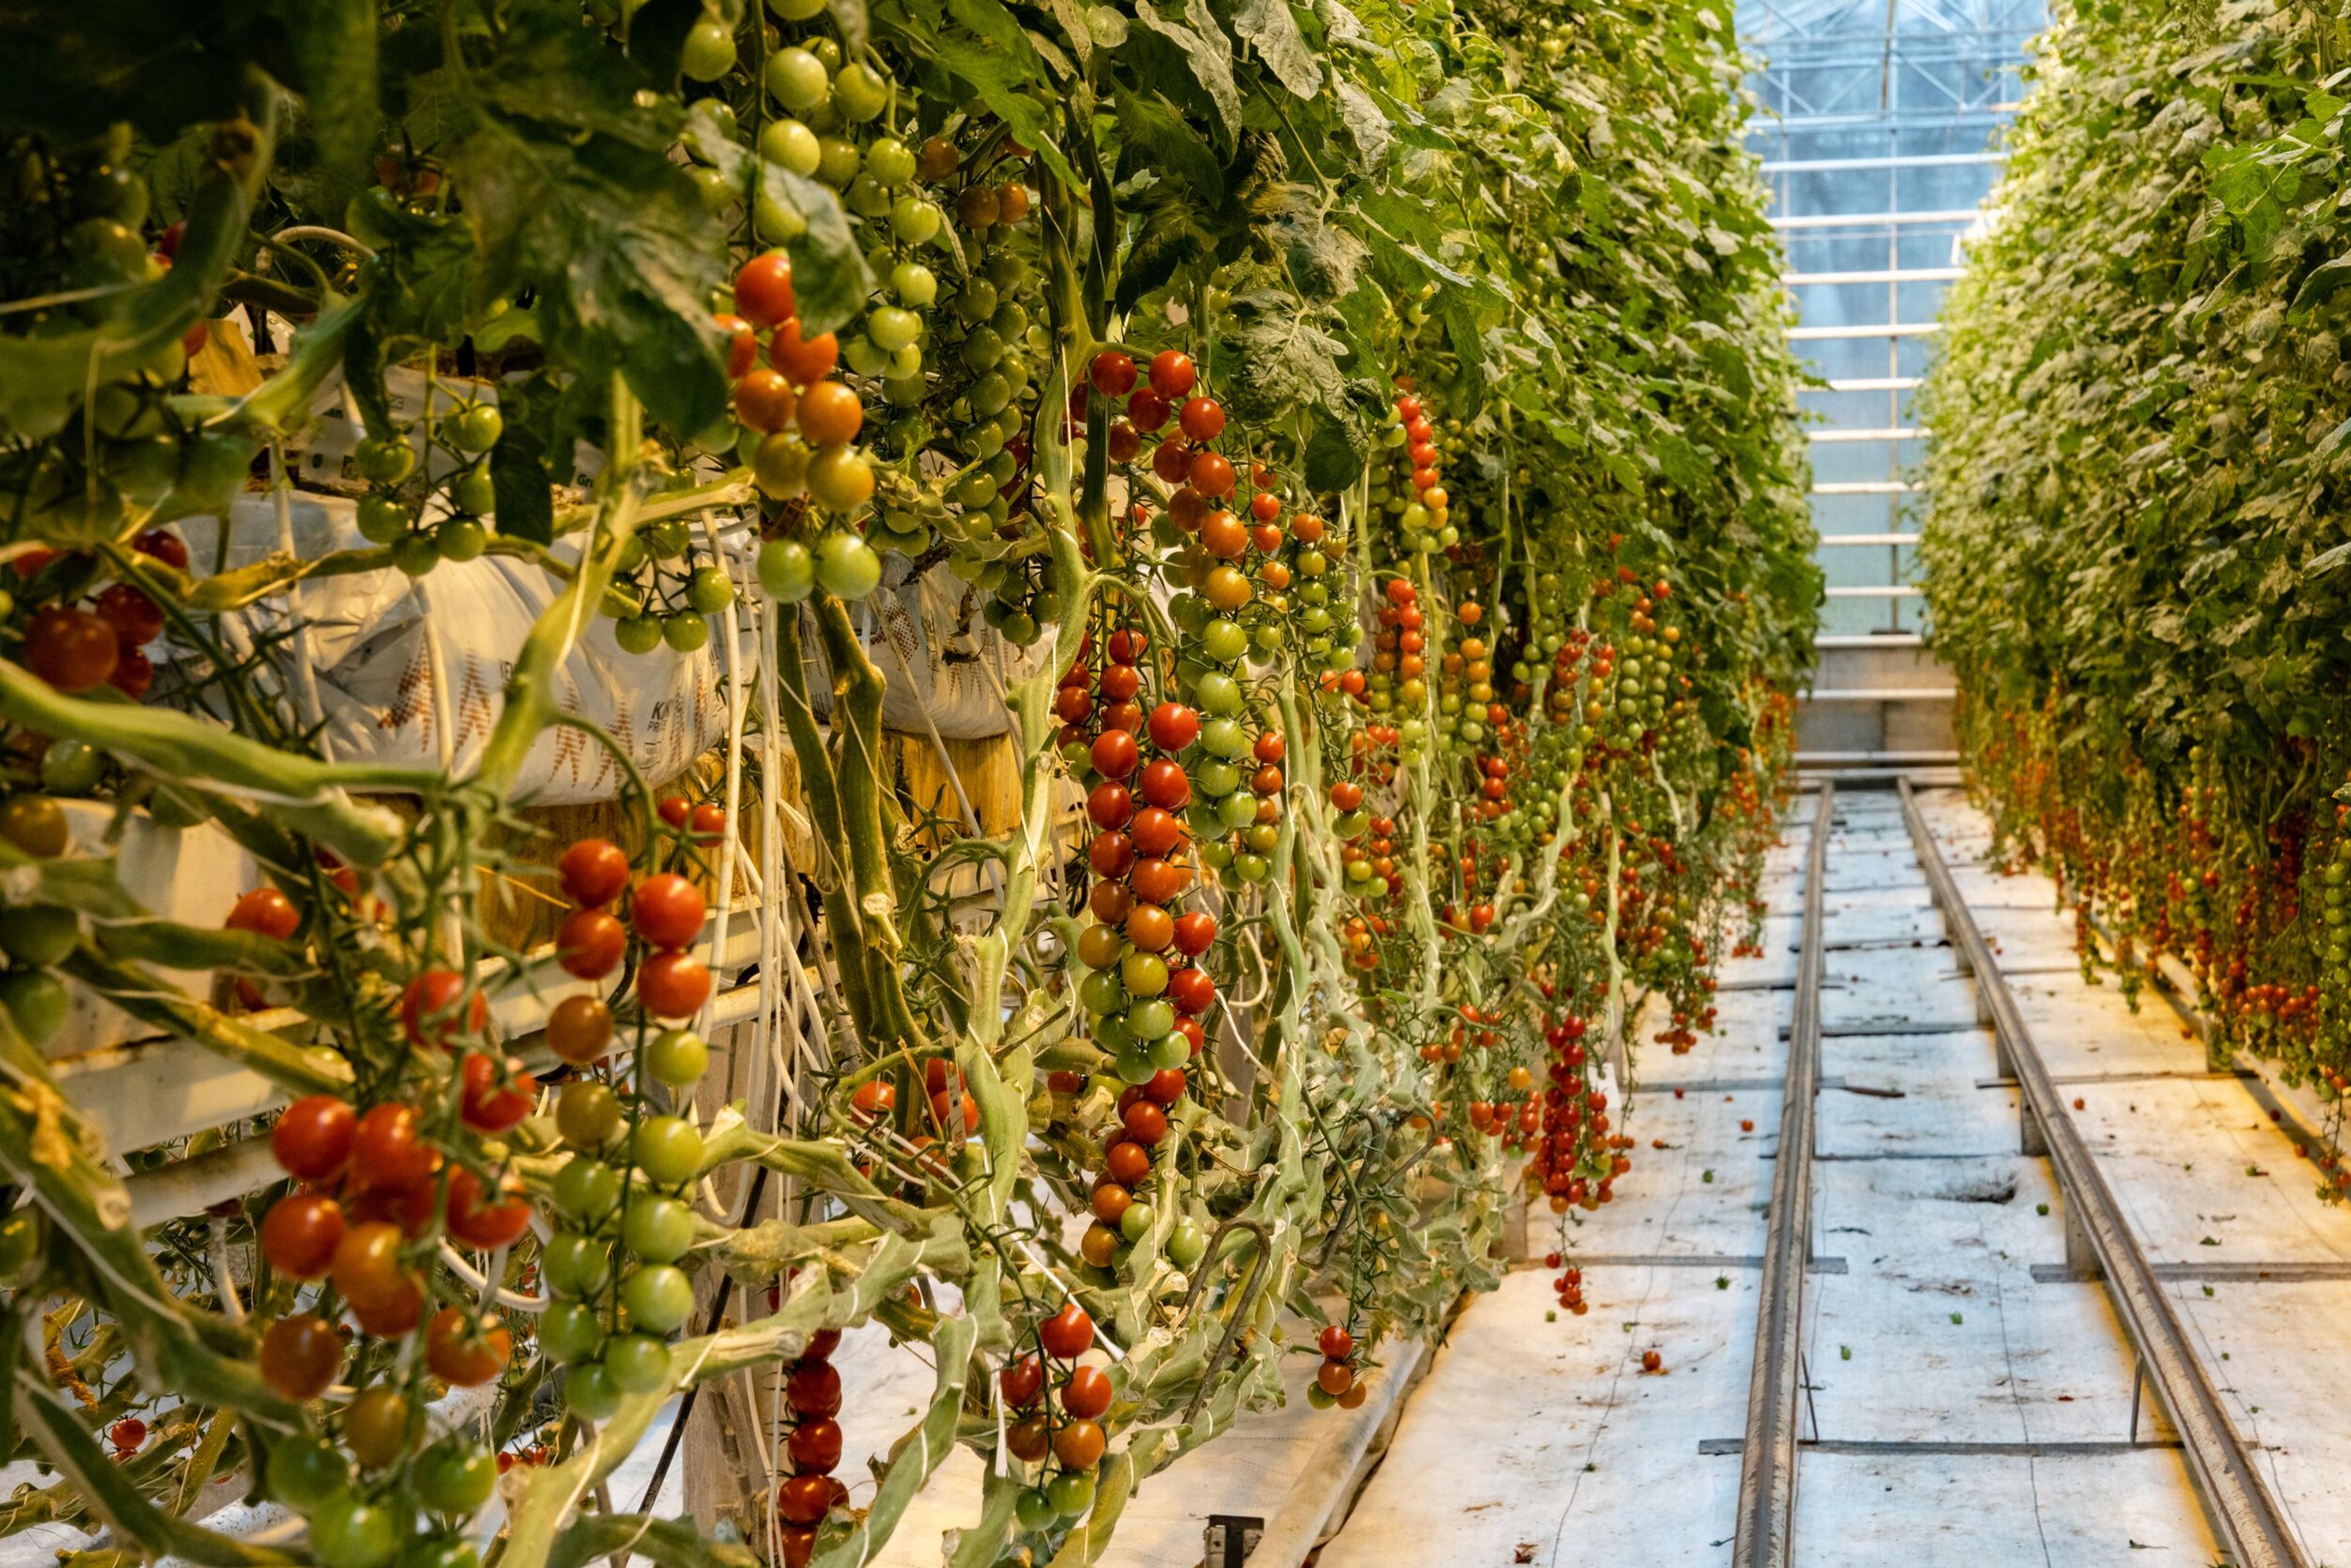 A vibrant indoor tomato farm with rows of ripe, red tomatoes hanging from plants, with a central walkway leading through the greenhouse, showcasing sustainable agriculture in Iceland.